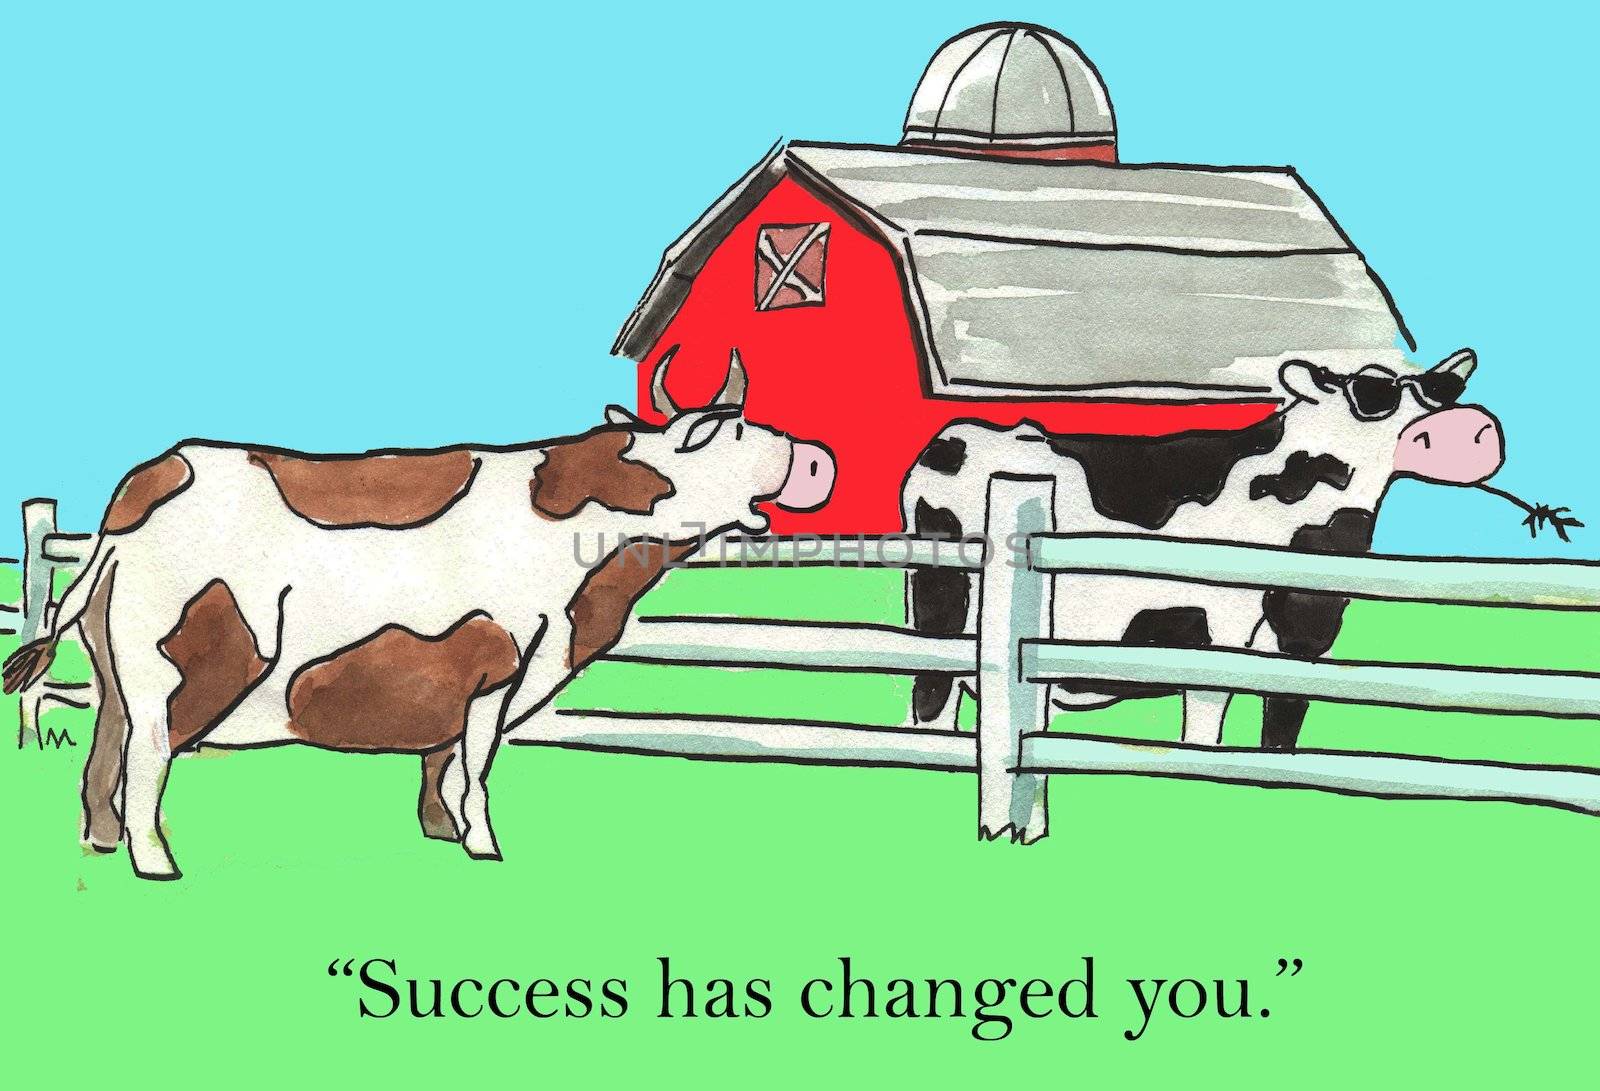 "Success has changed you."